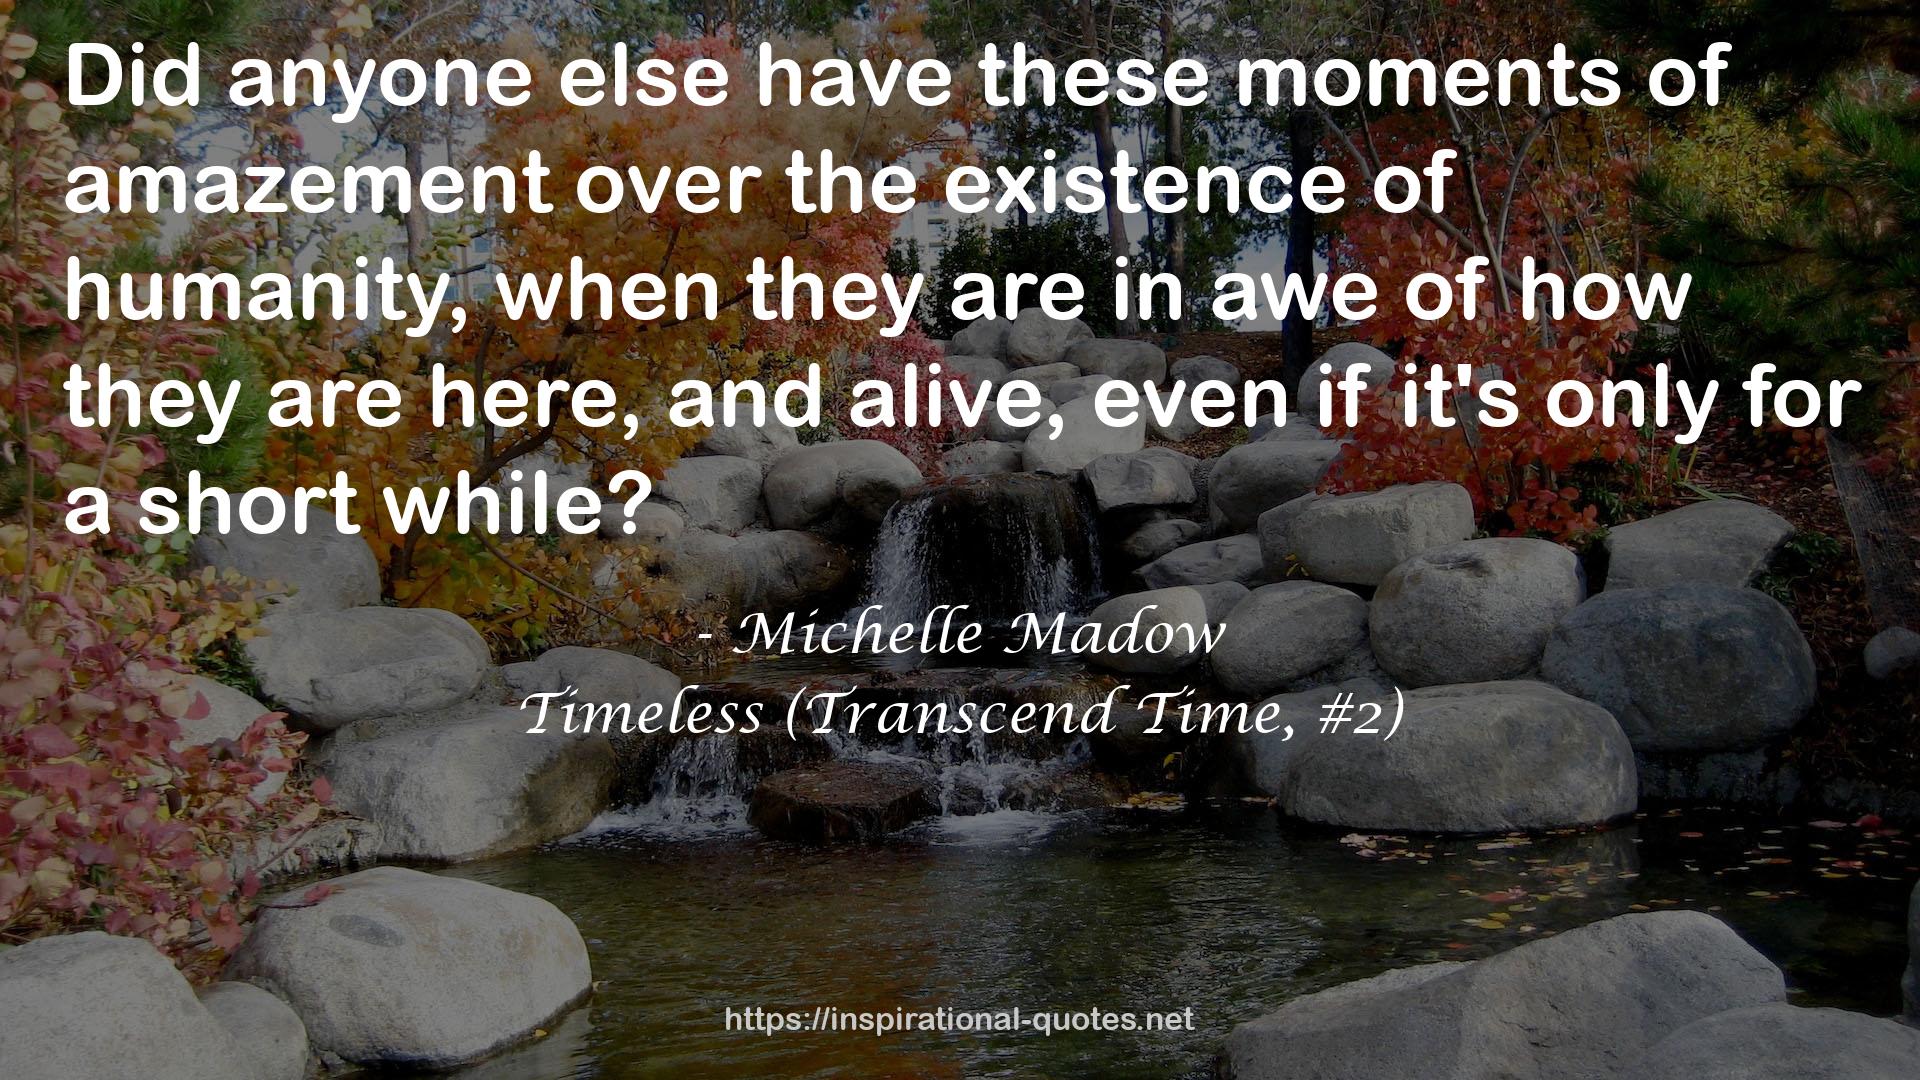 Timeless (Transcend Time, #2) QUOTES